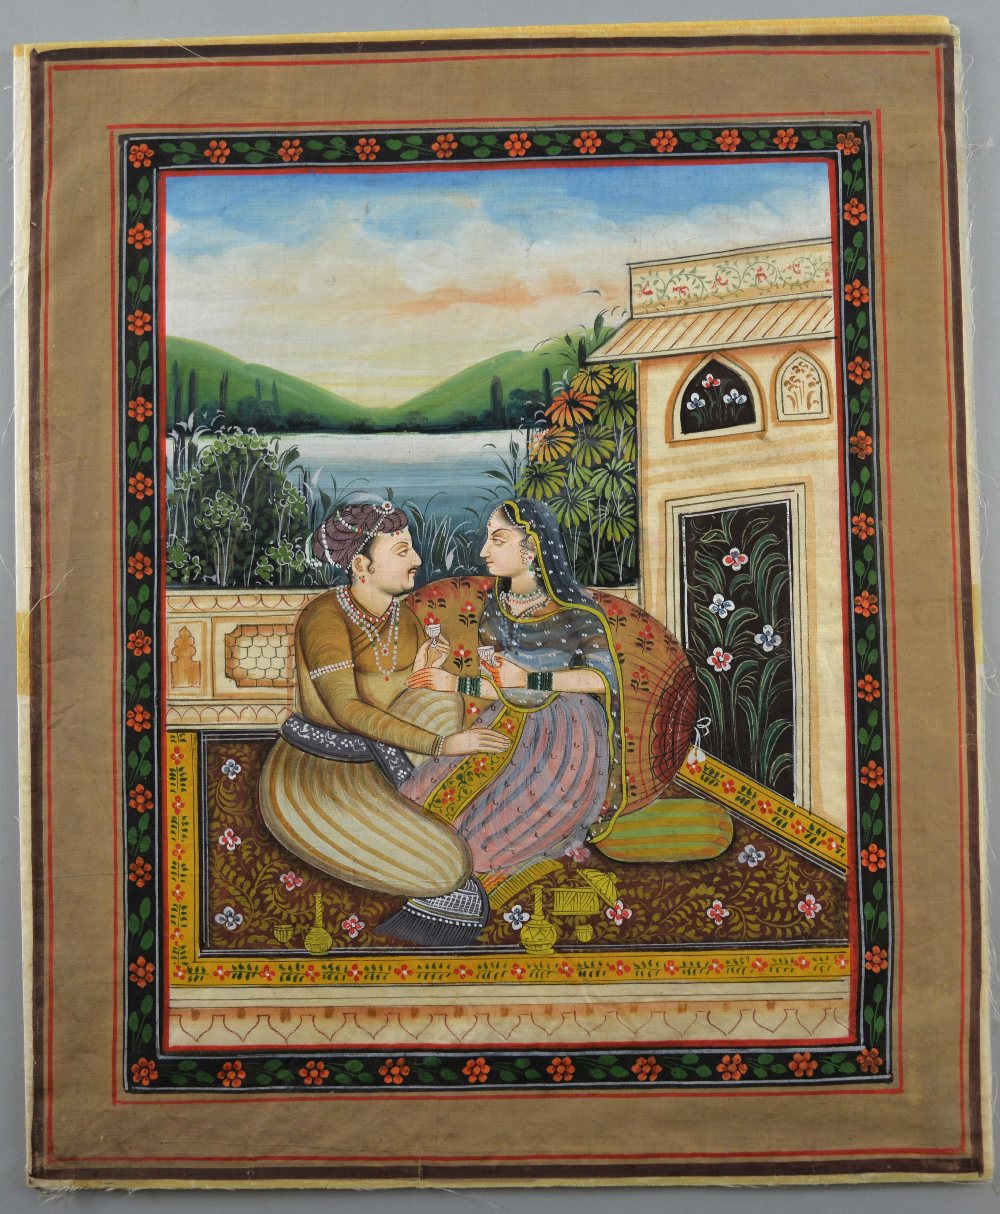 Indian miniature painting depicting a man and woman seated on a carpet on a balcony with a lake